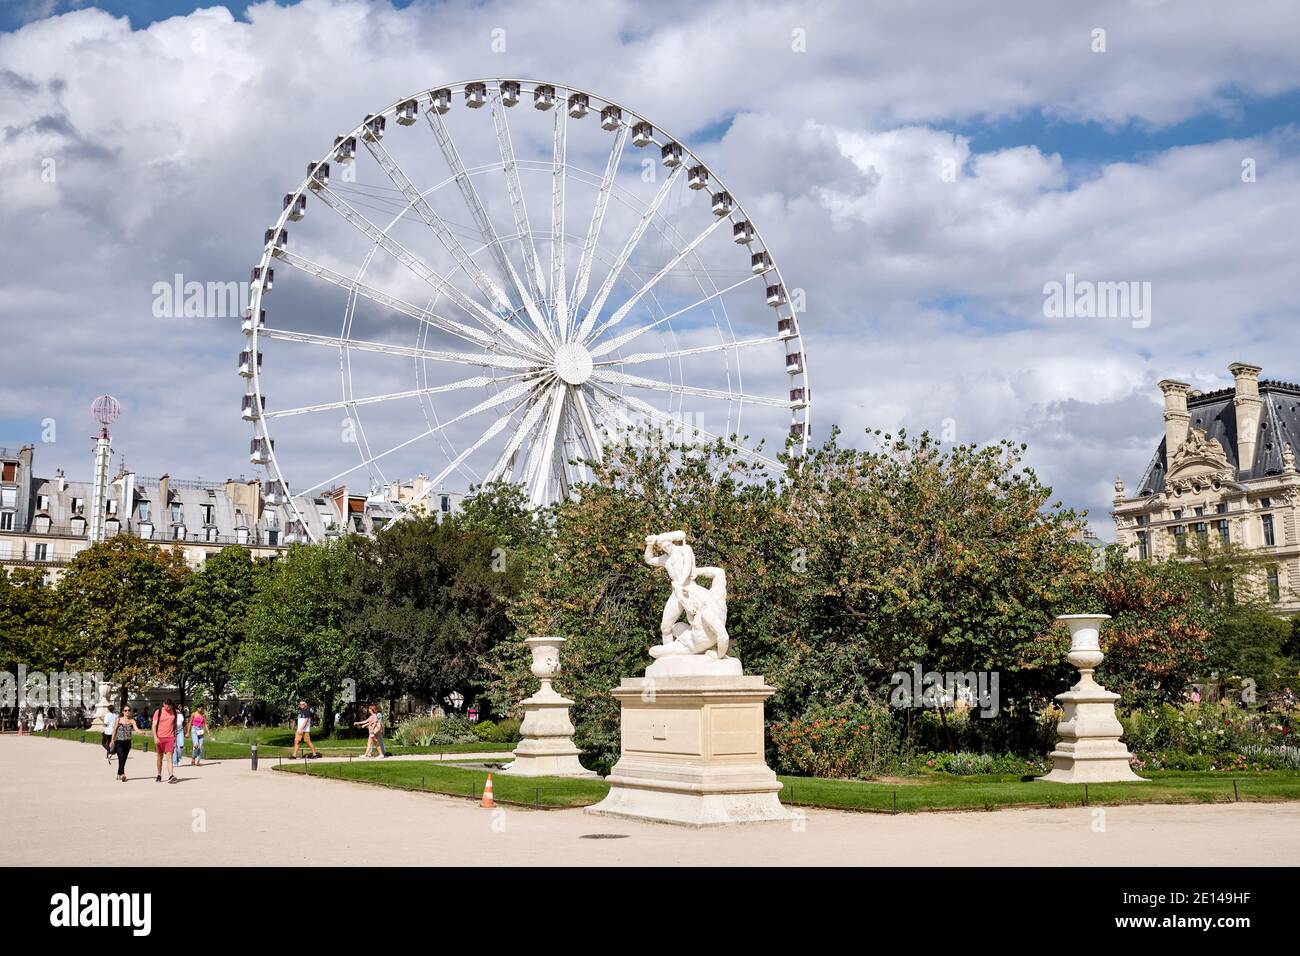 Paris (France): the “Jardin des Tuileries” botanical garden in the 1st arrondissement (district). In the background, the Big wheel Stock Photo